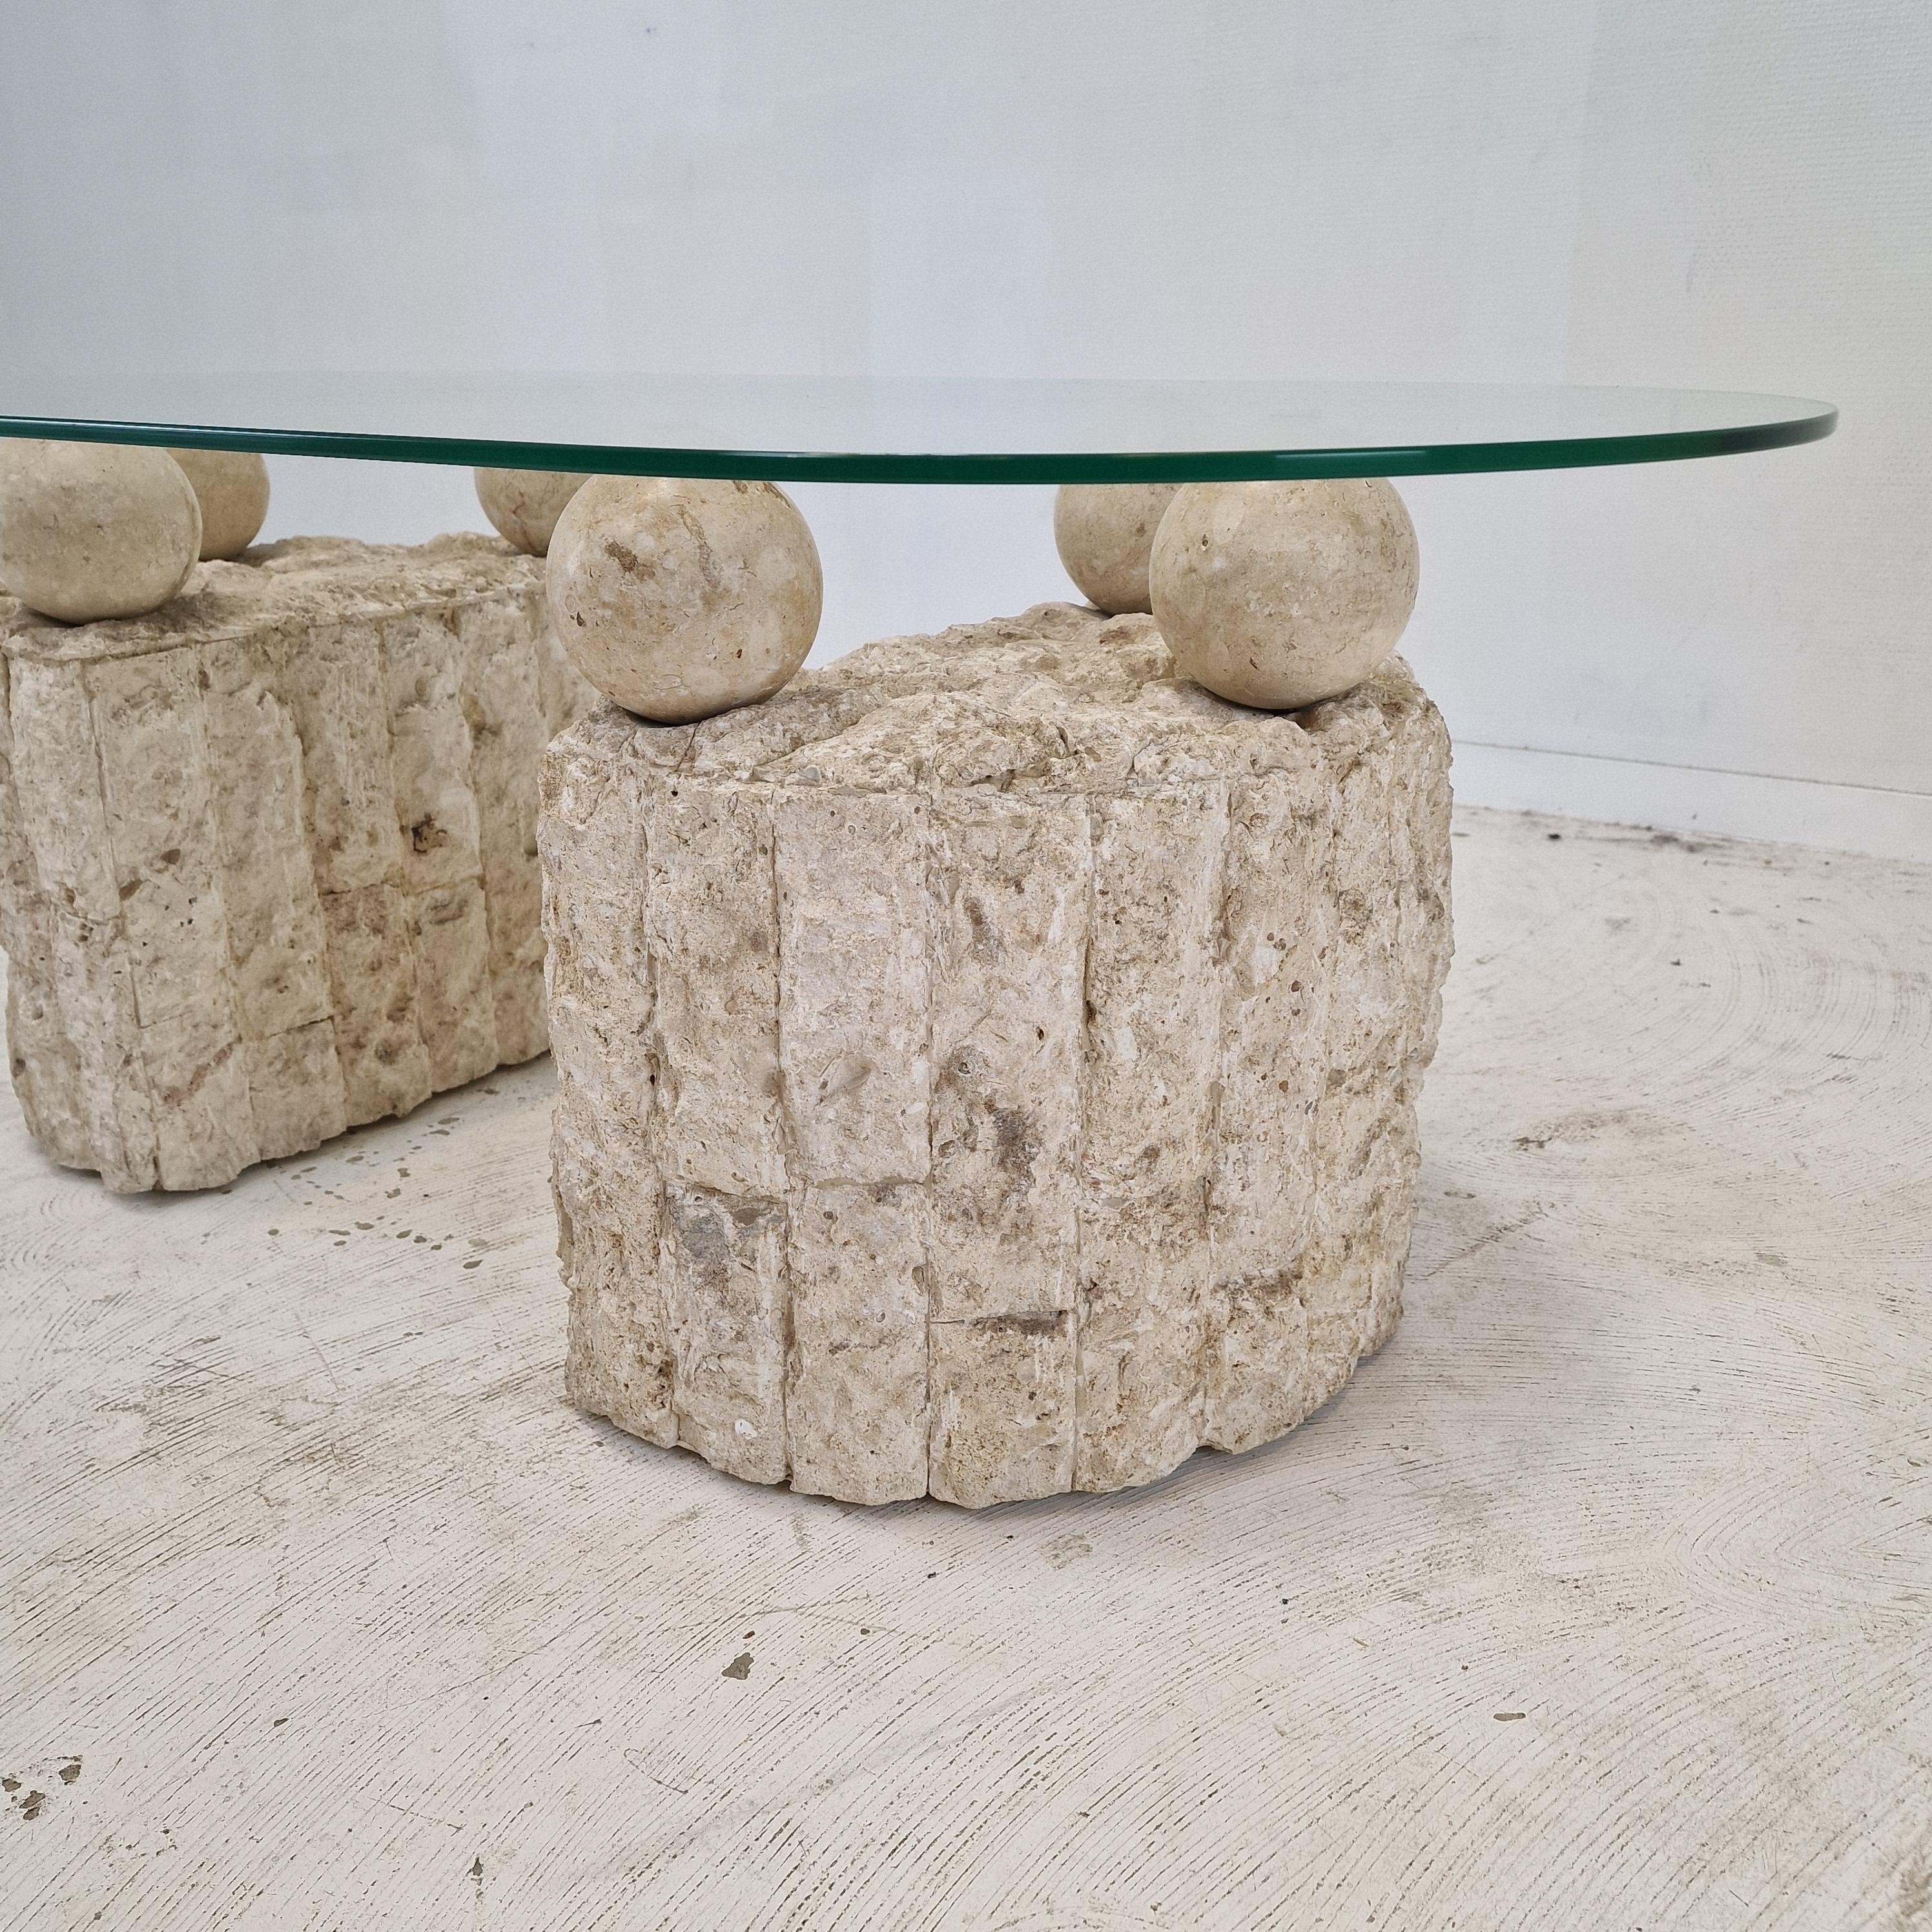 Magnussen Ponte Mactan Stone Coffee or Fossil Stone Table, 1980s For Sale 2